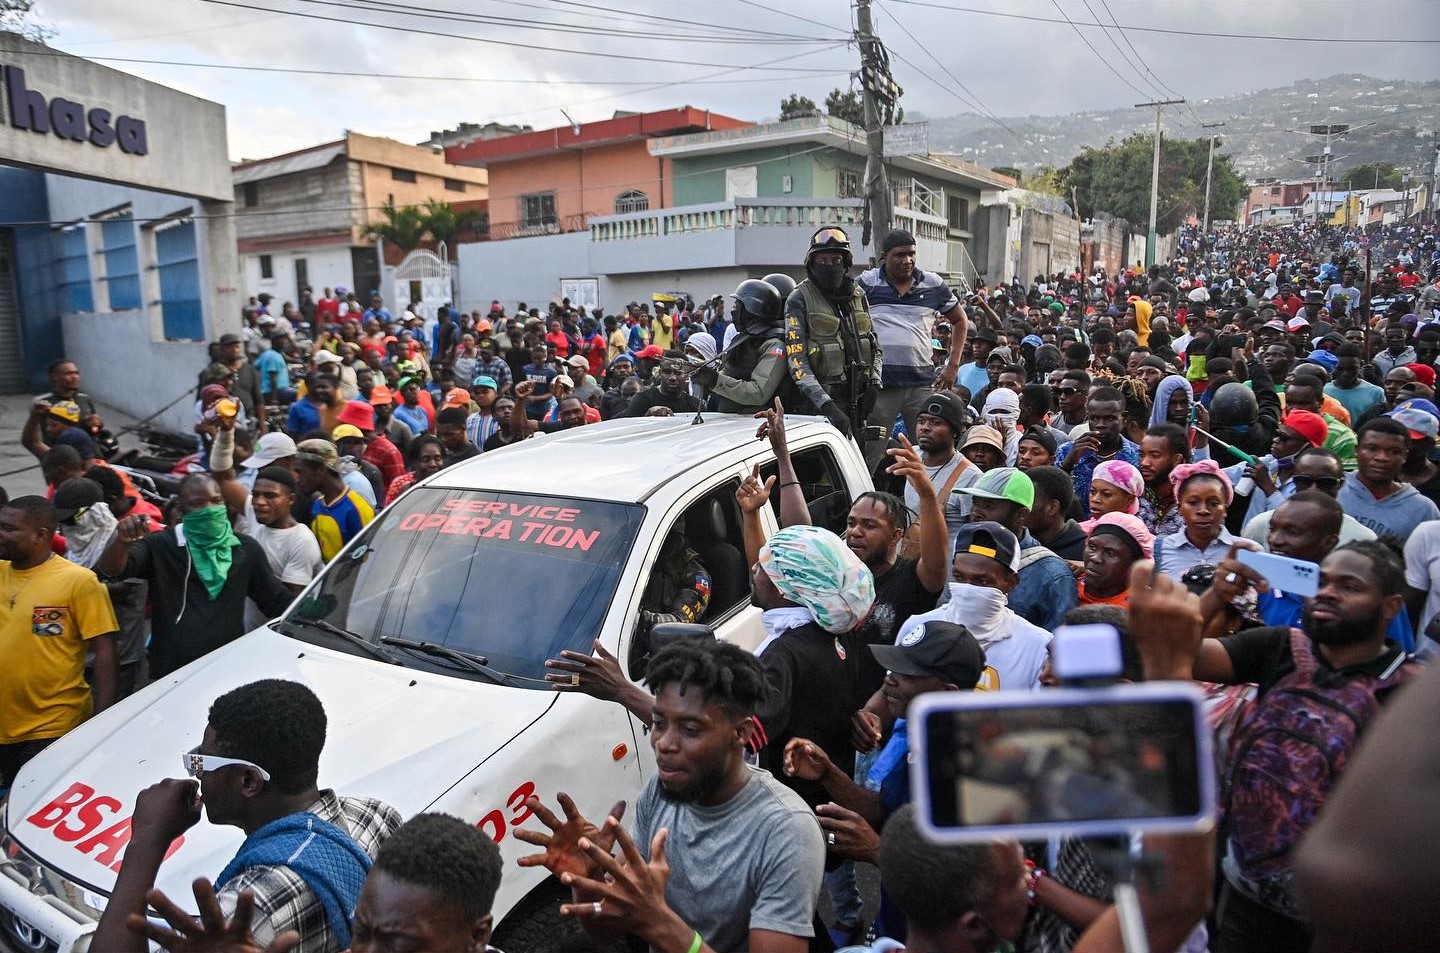 a-new-day-of-demonstrations-punctuated-by-violence-in-haiti